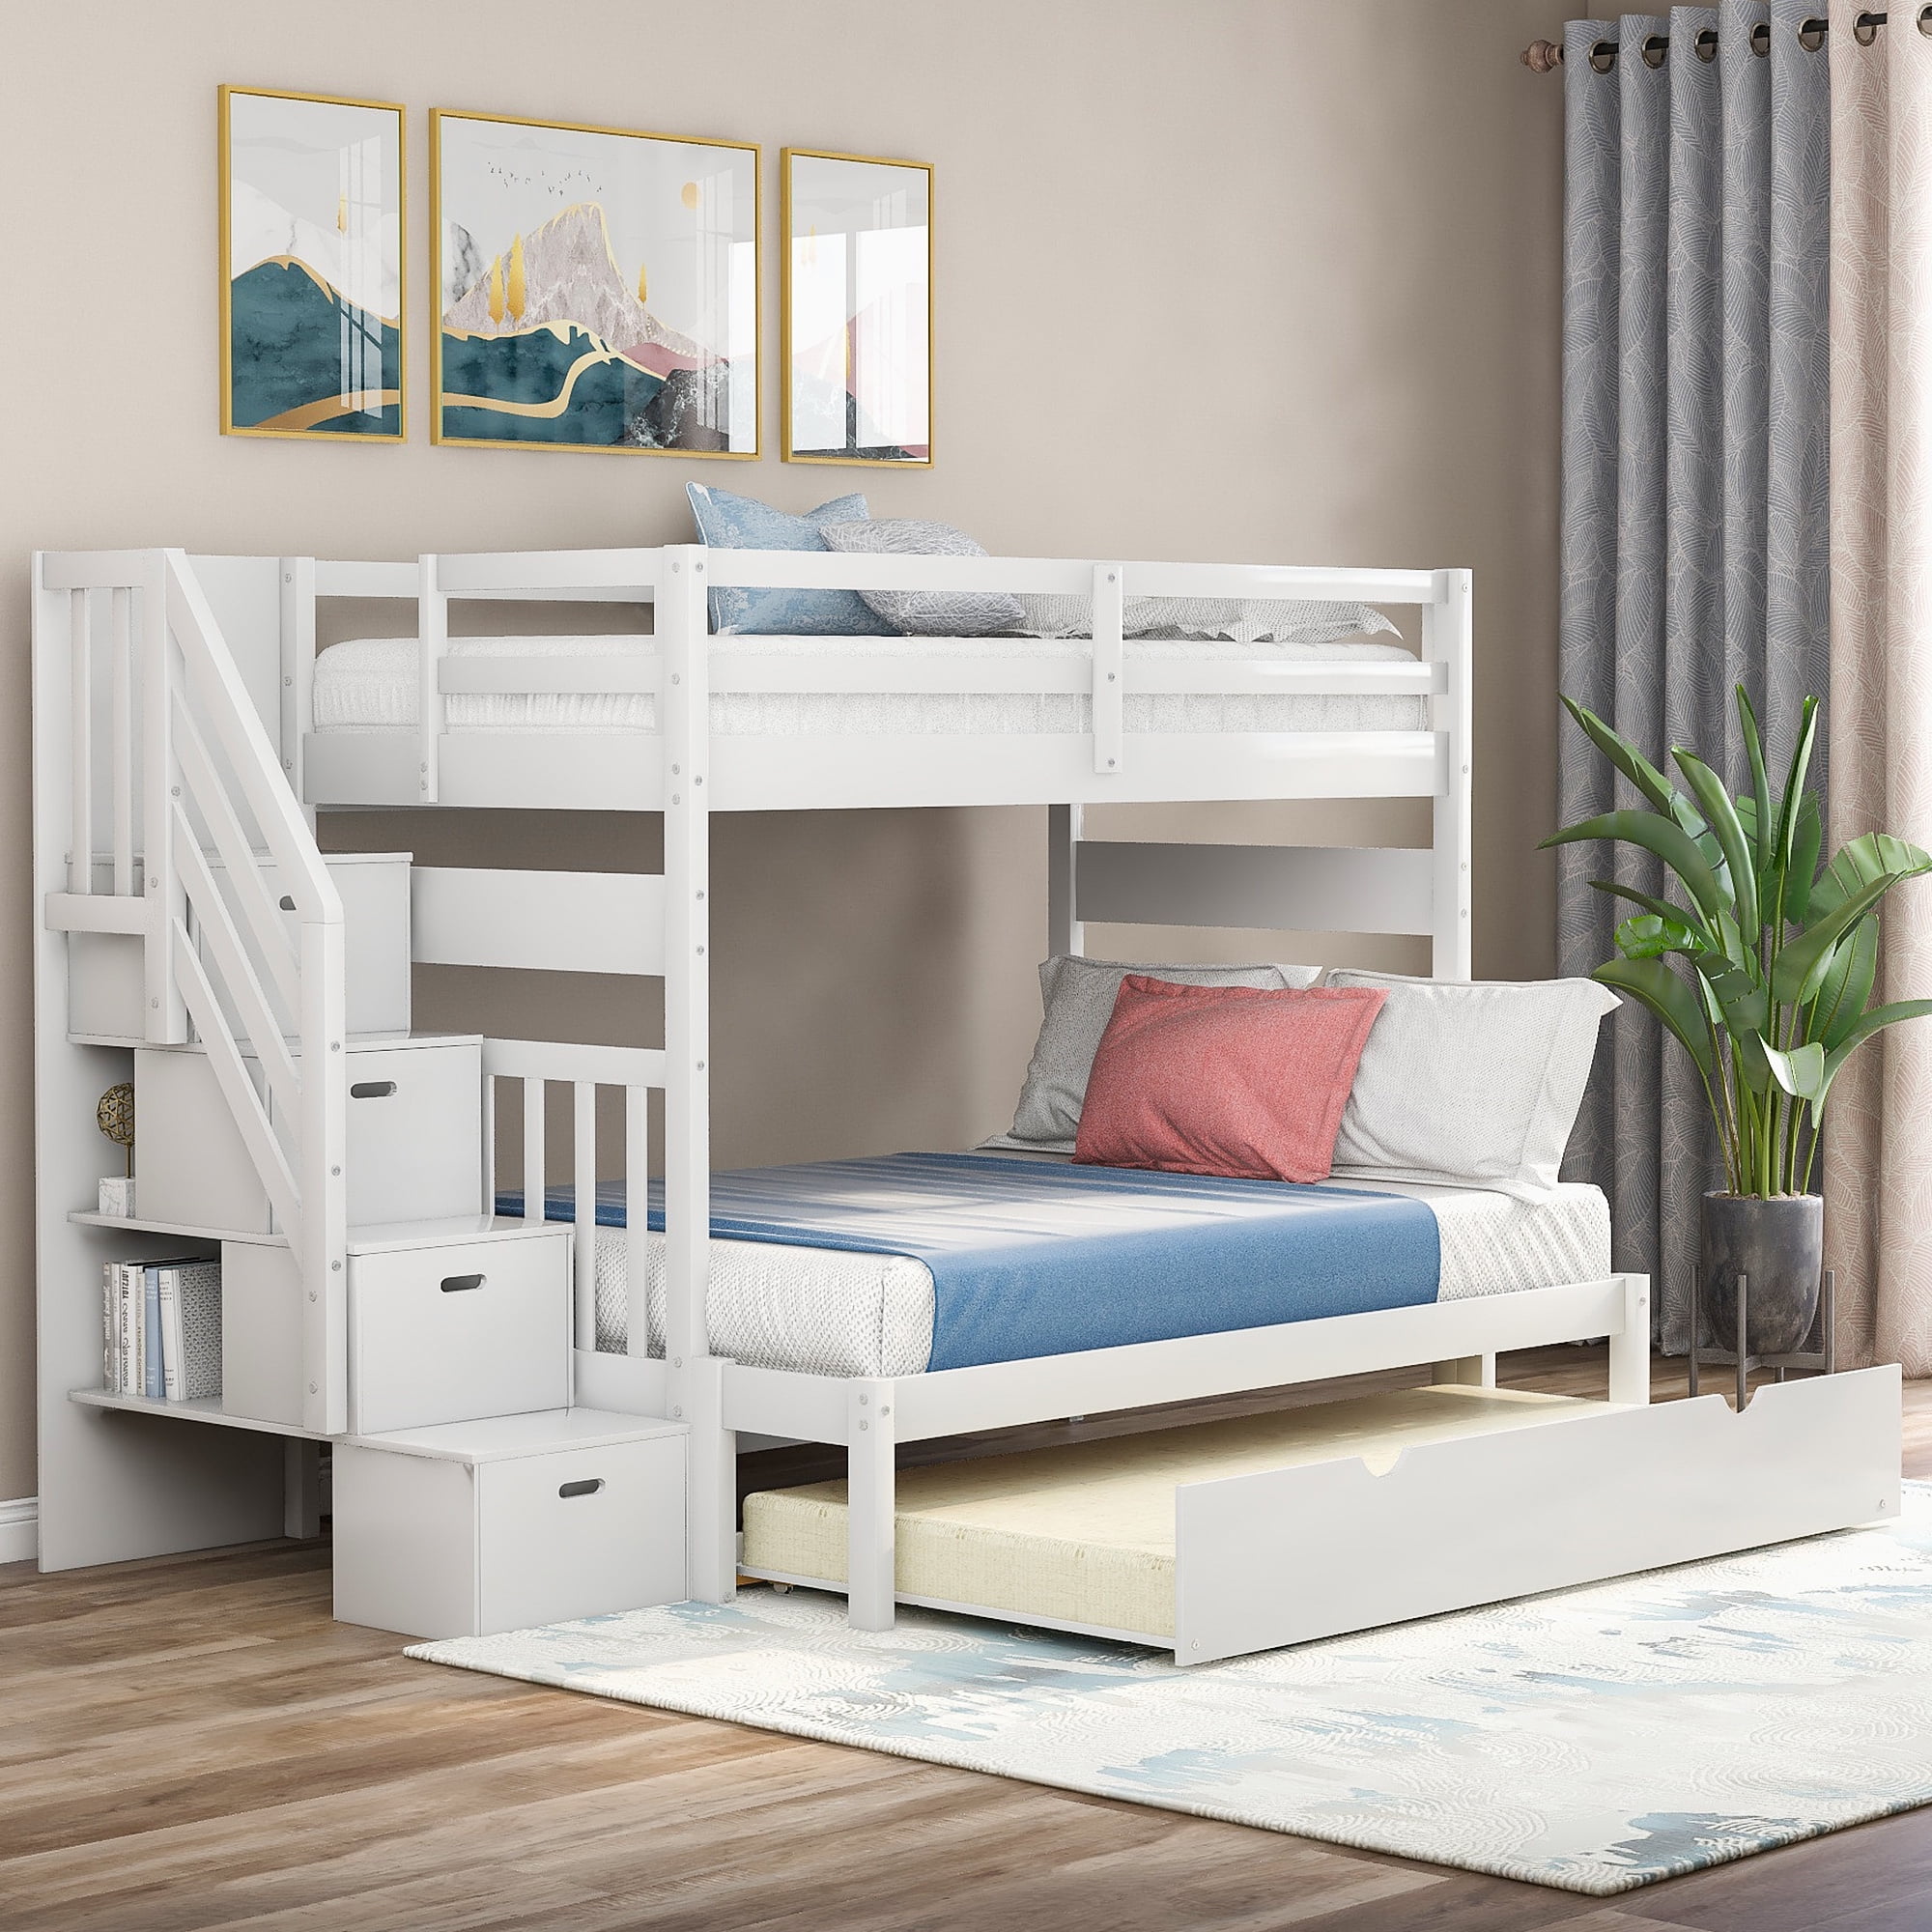 Stairway Twin Over Full Bunk Beds With, Stairway Twin Bunk Bed With Trundle